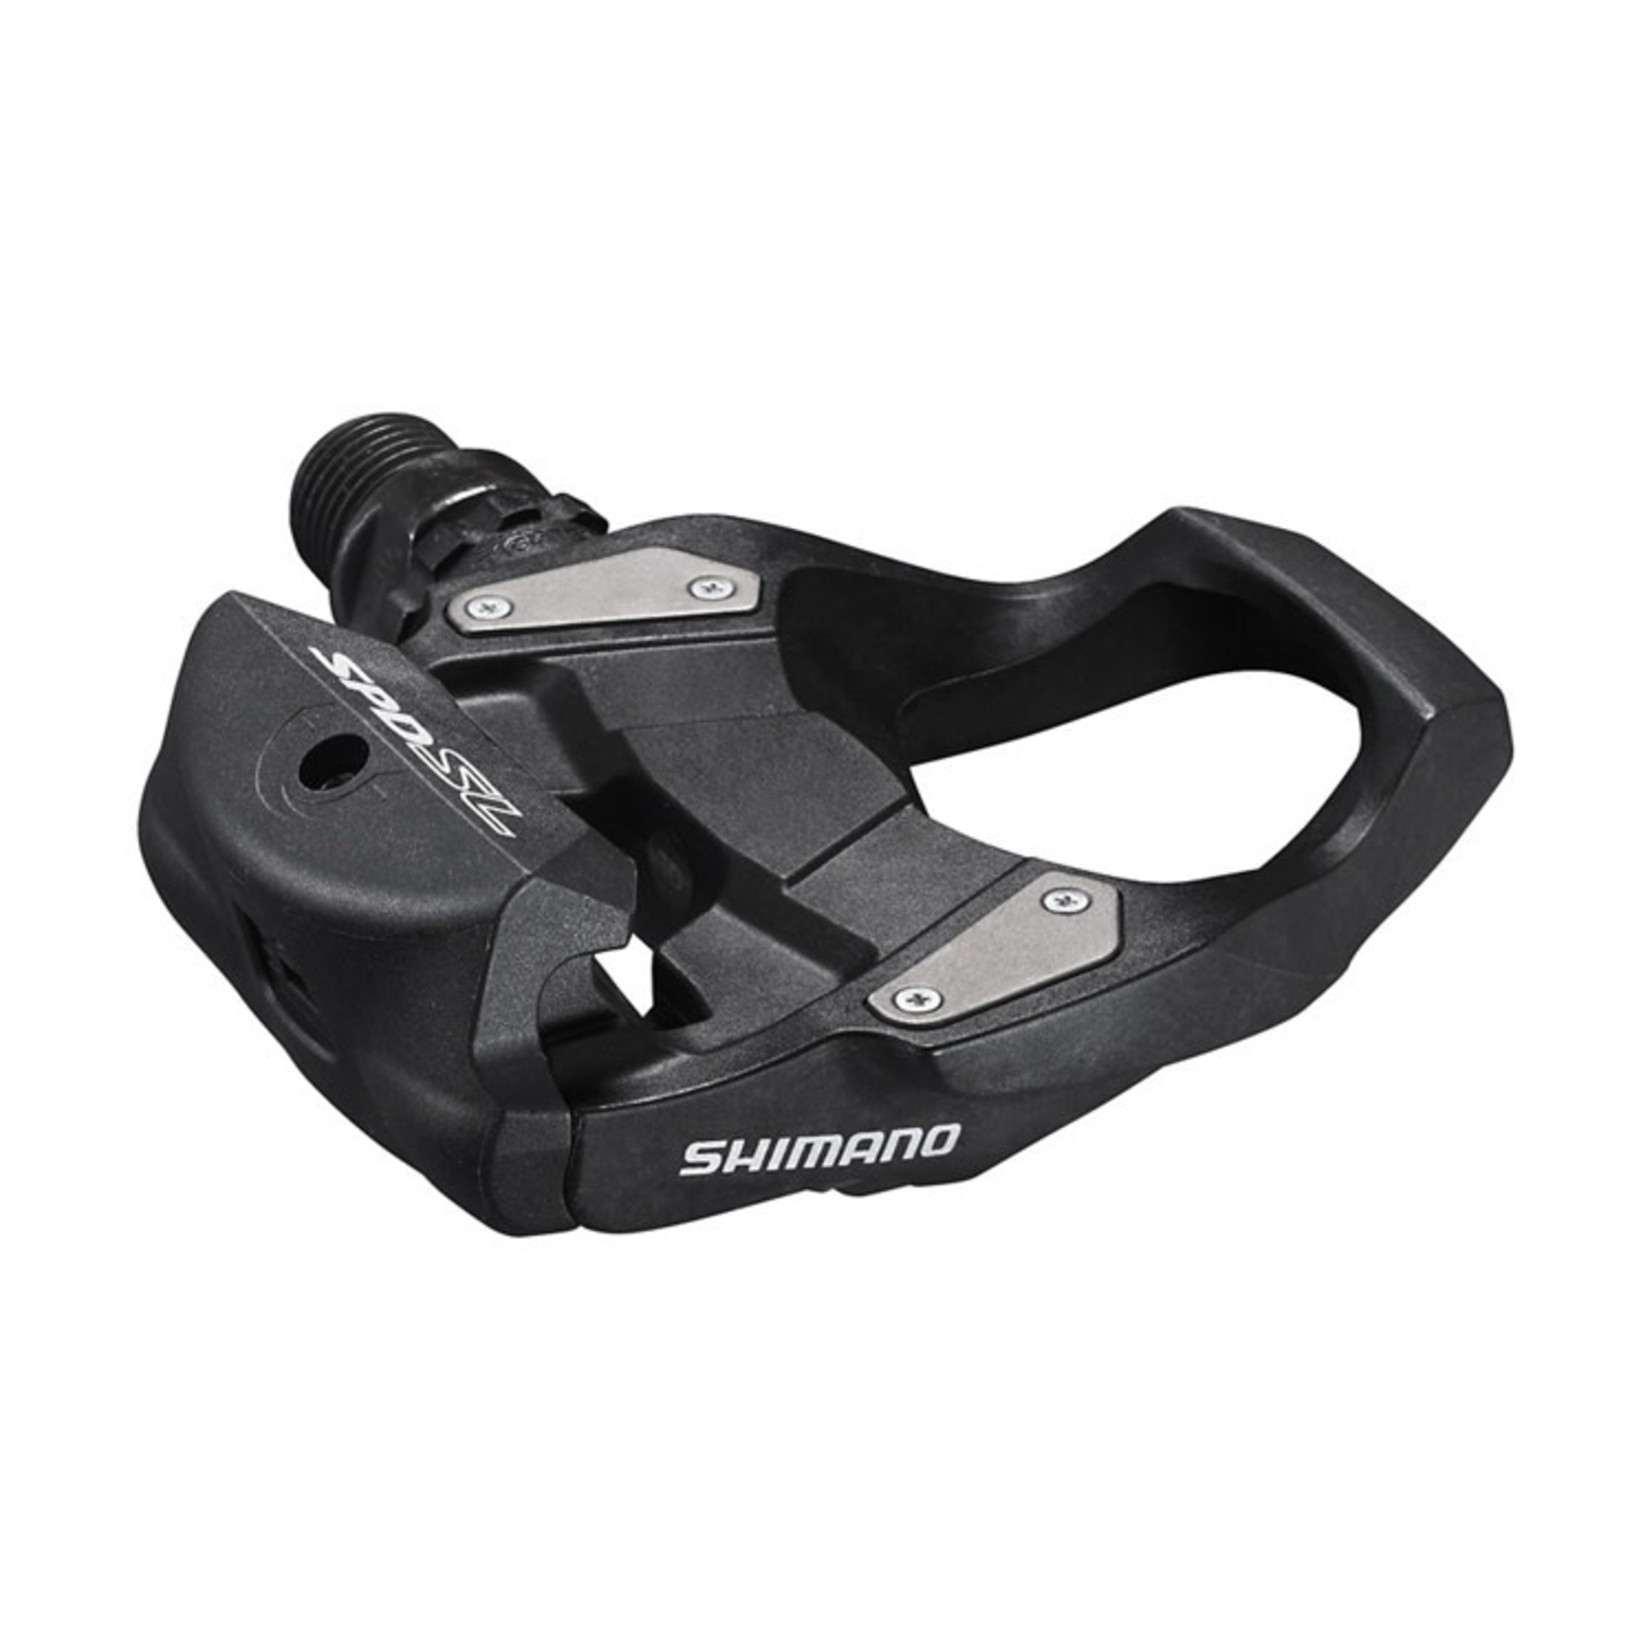 Shimano PEDAL, PD-RS500, SPD-SL, W/CLEAT(SM-SH11)